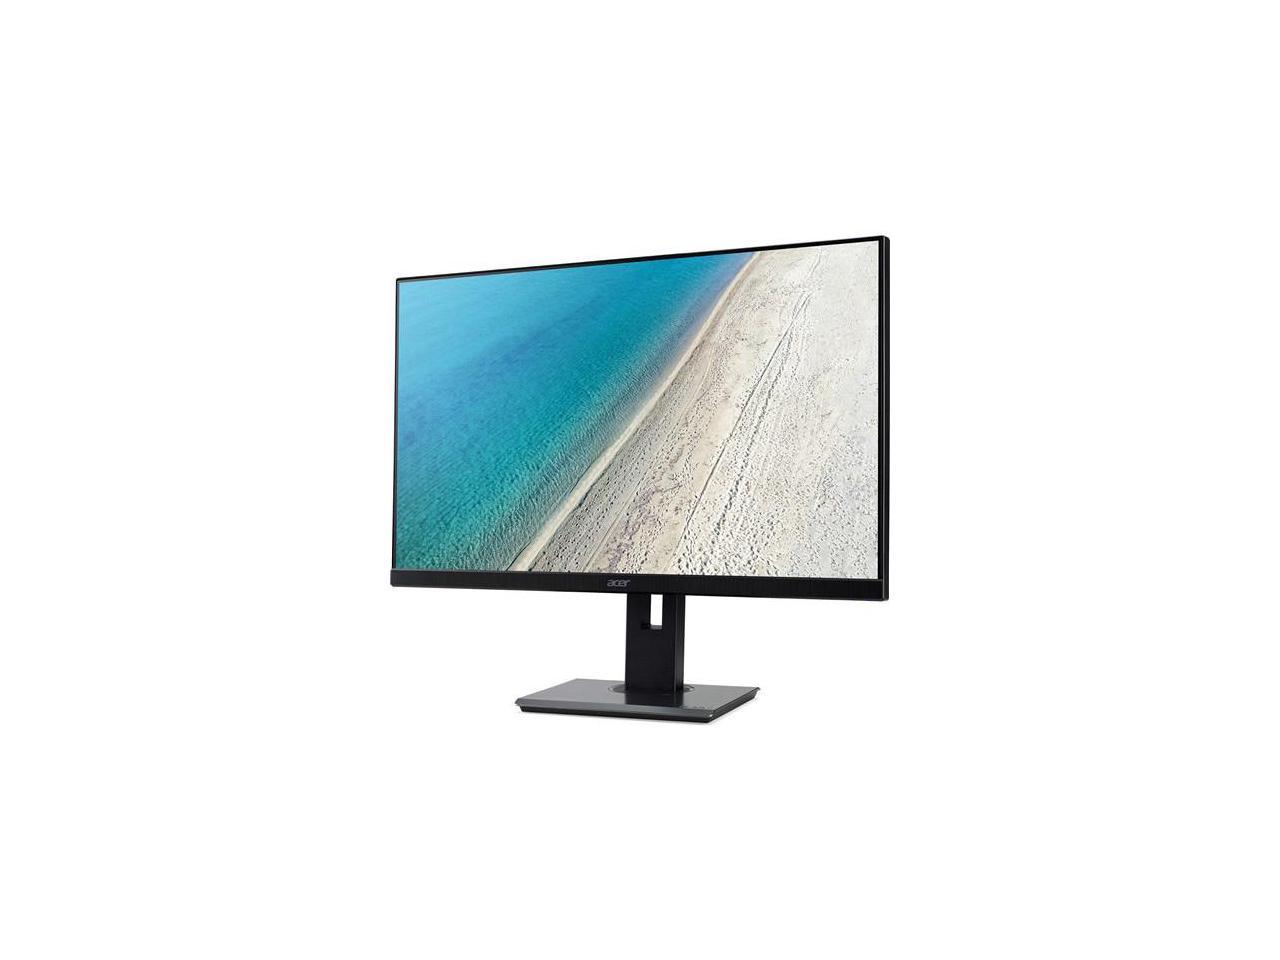 Acer B247Y 23.8" LED LCD Monitor - 16:9 - 4 ms GTG